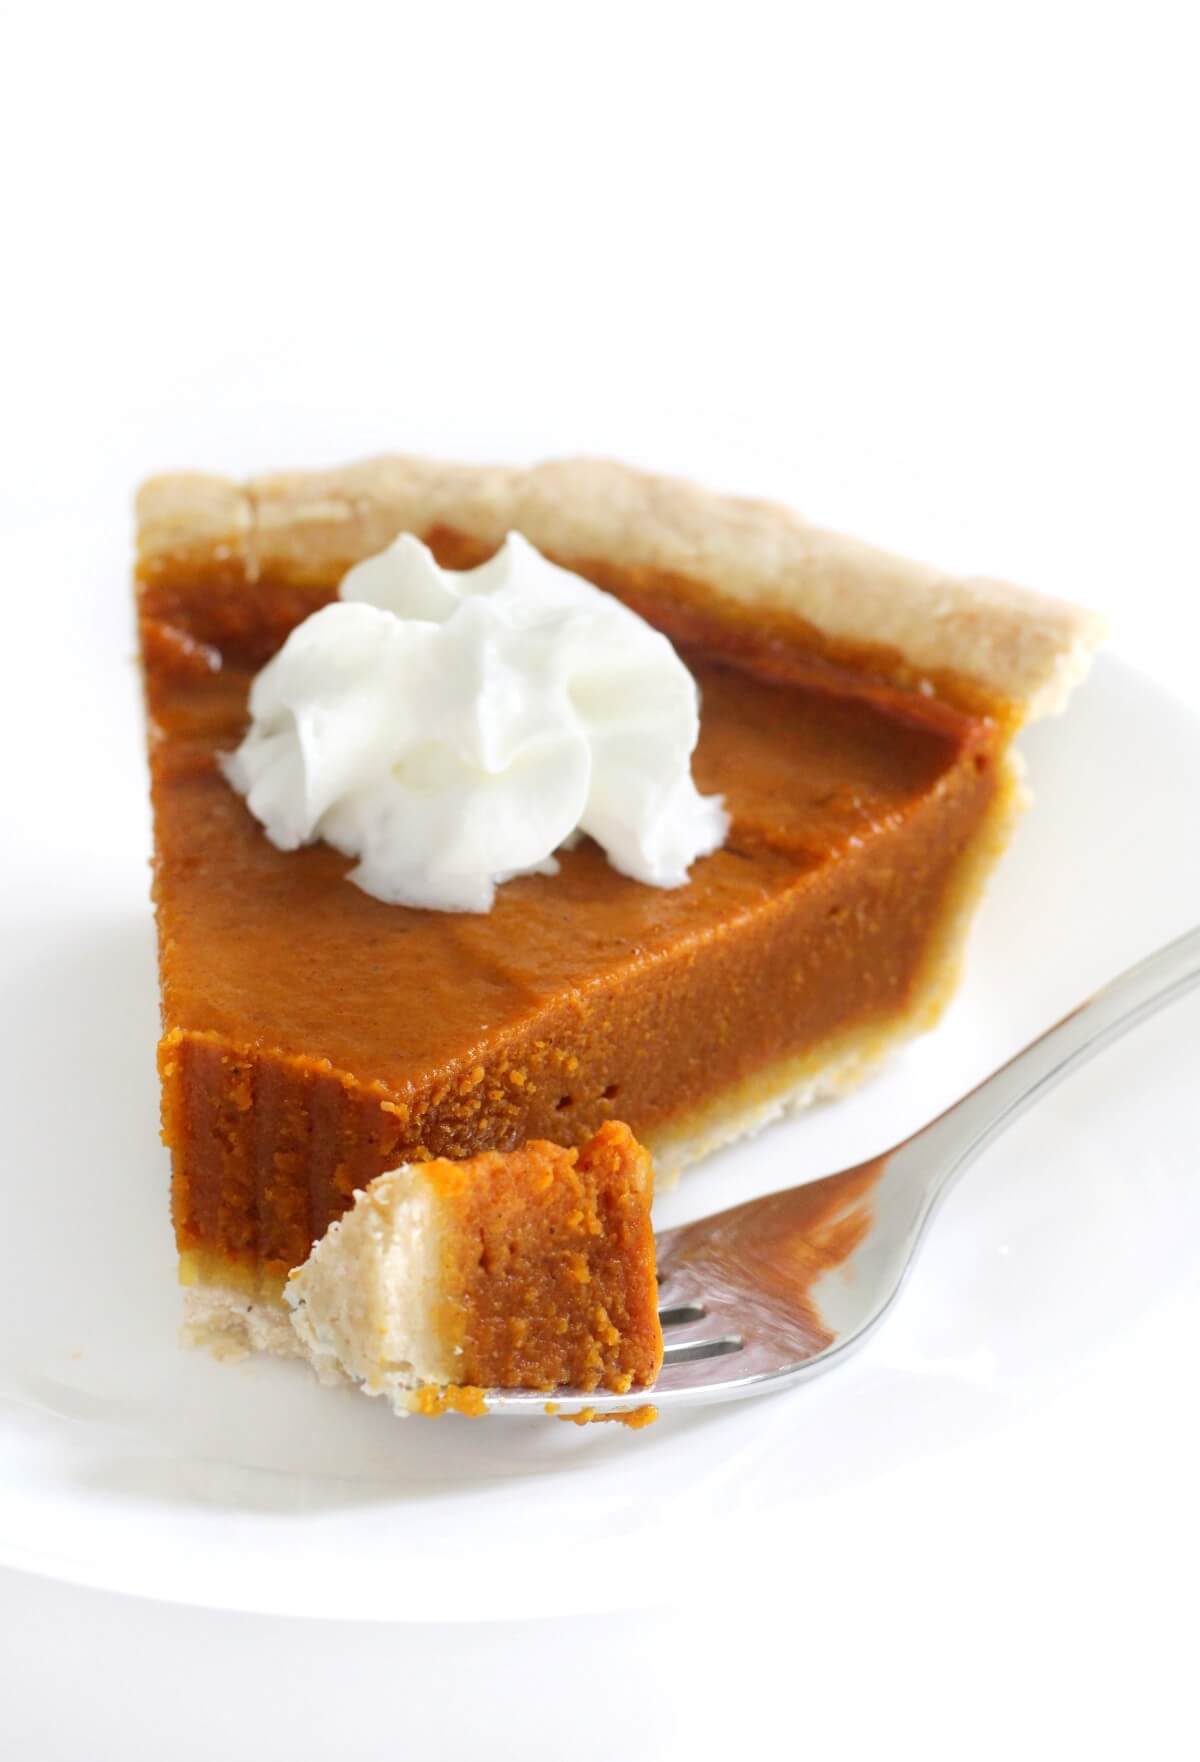 forkful and slice of gluten-free vegan pumpkin pie on plate with whipped cream.